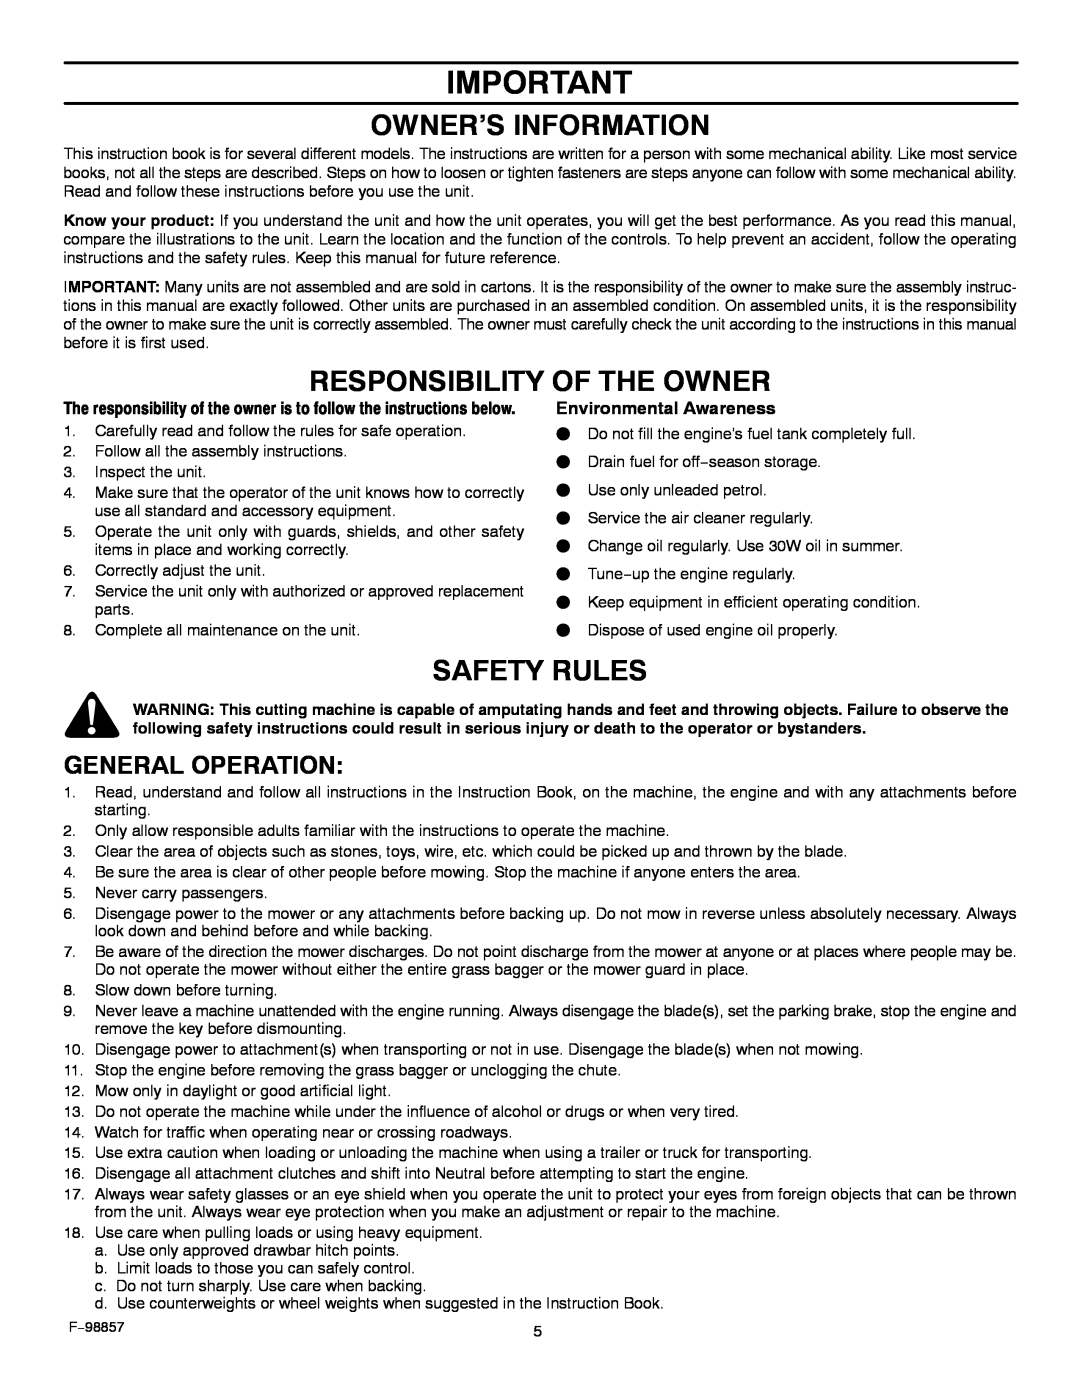 Hayter Mowers 30-Dec manual Owner’S Information, Responsibility Of The Owner, Safety Rules, General Operation 